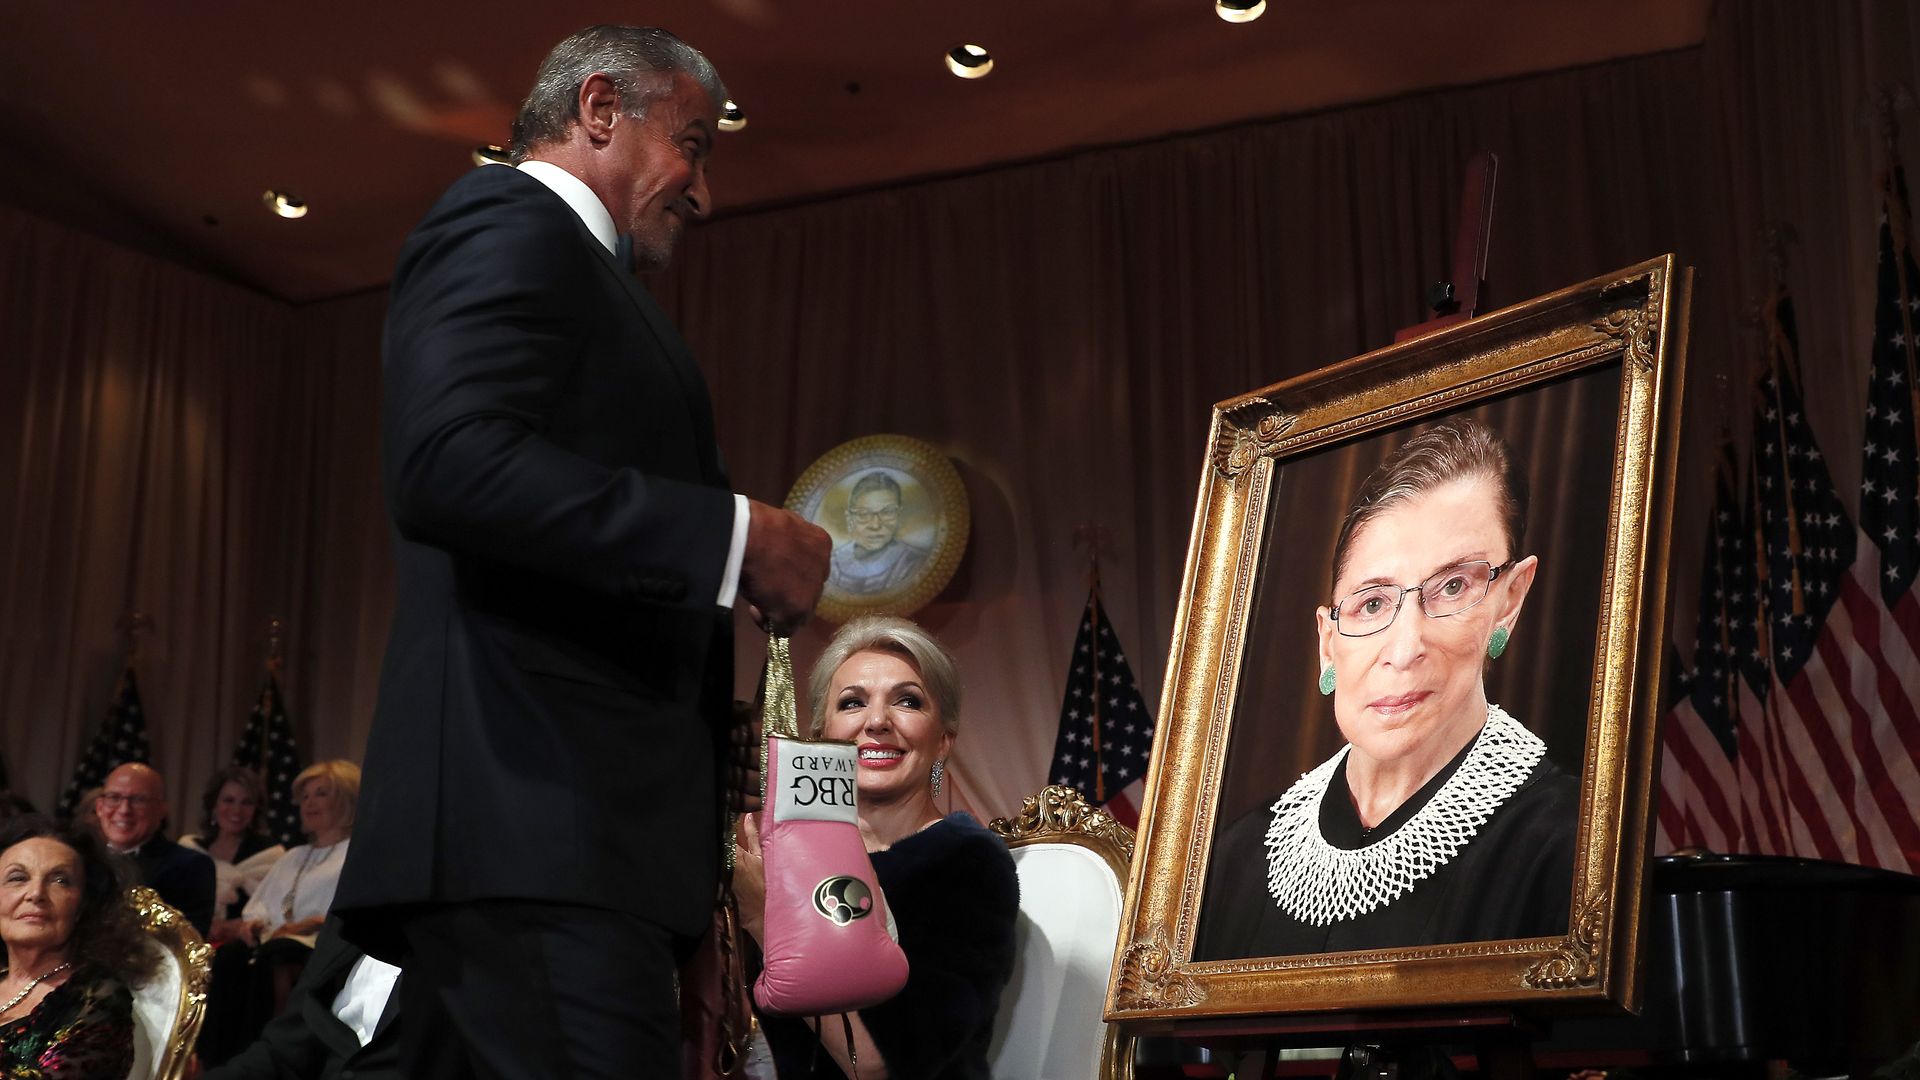 Sylvester Stallone is seen placing a pair of boxing gloves at a portrait of the late Ruth Bader Ginsburg.